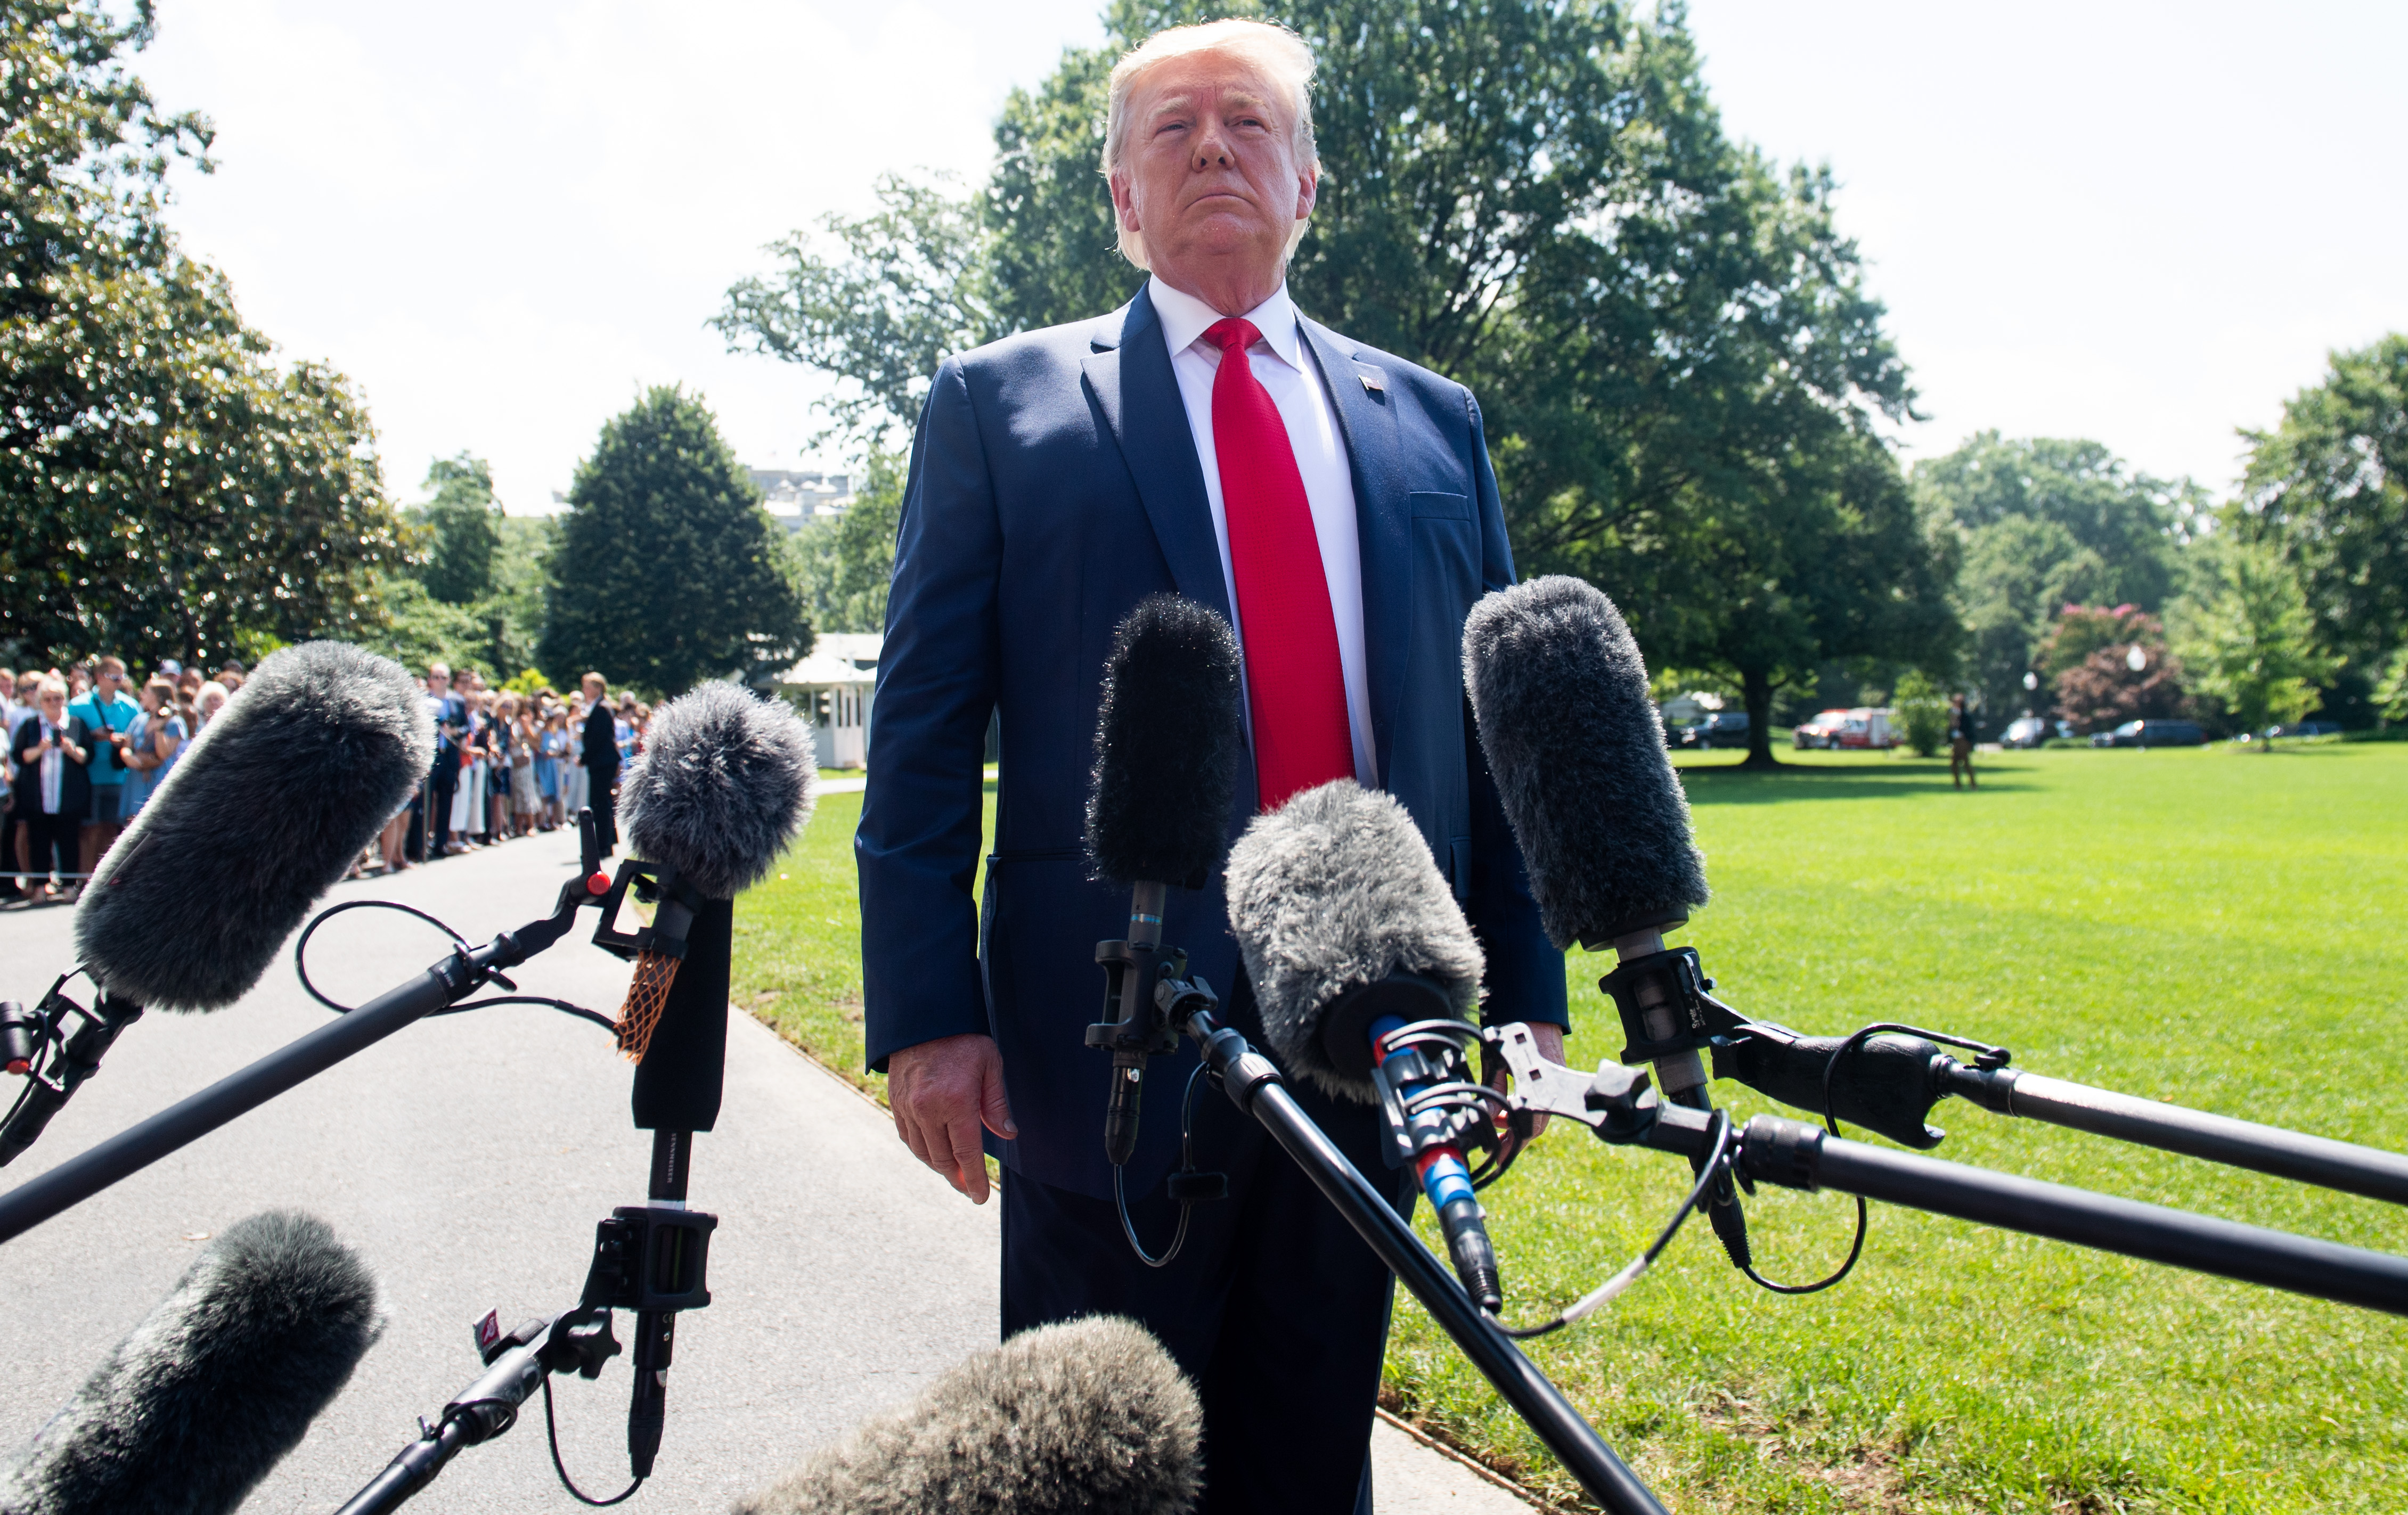 President Donald Trump speaks to the media prior to departing from the South Lawn of the White House on July 5, 2019. (Saul Loeb/AFP/Getty Images)